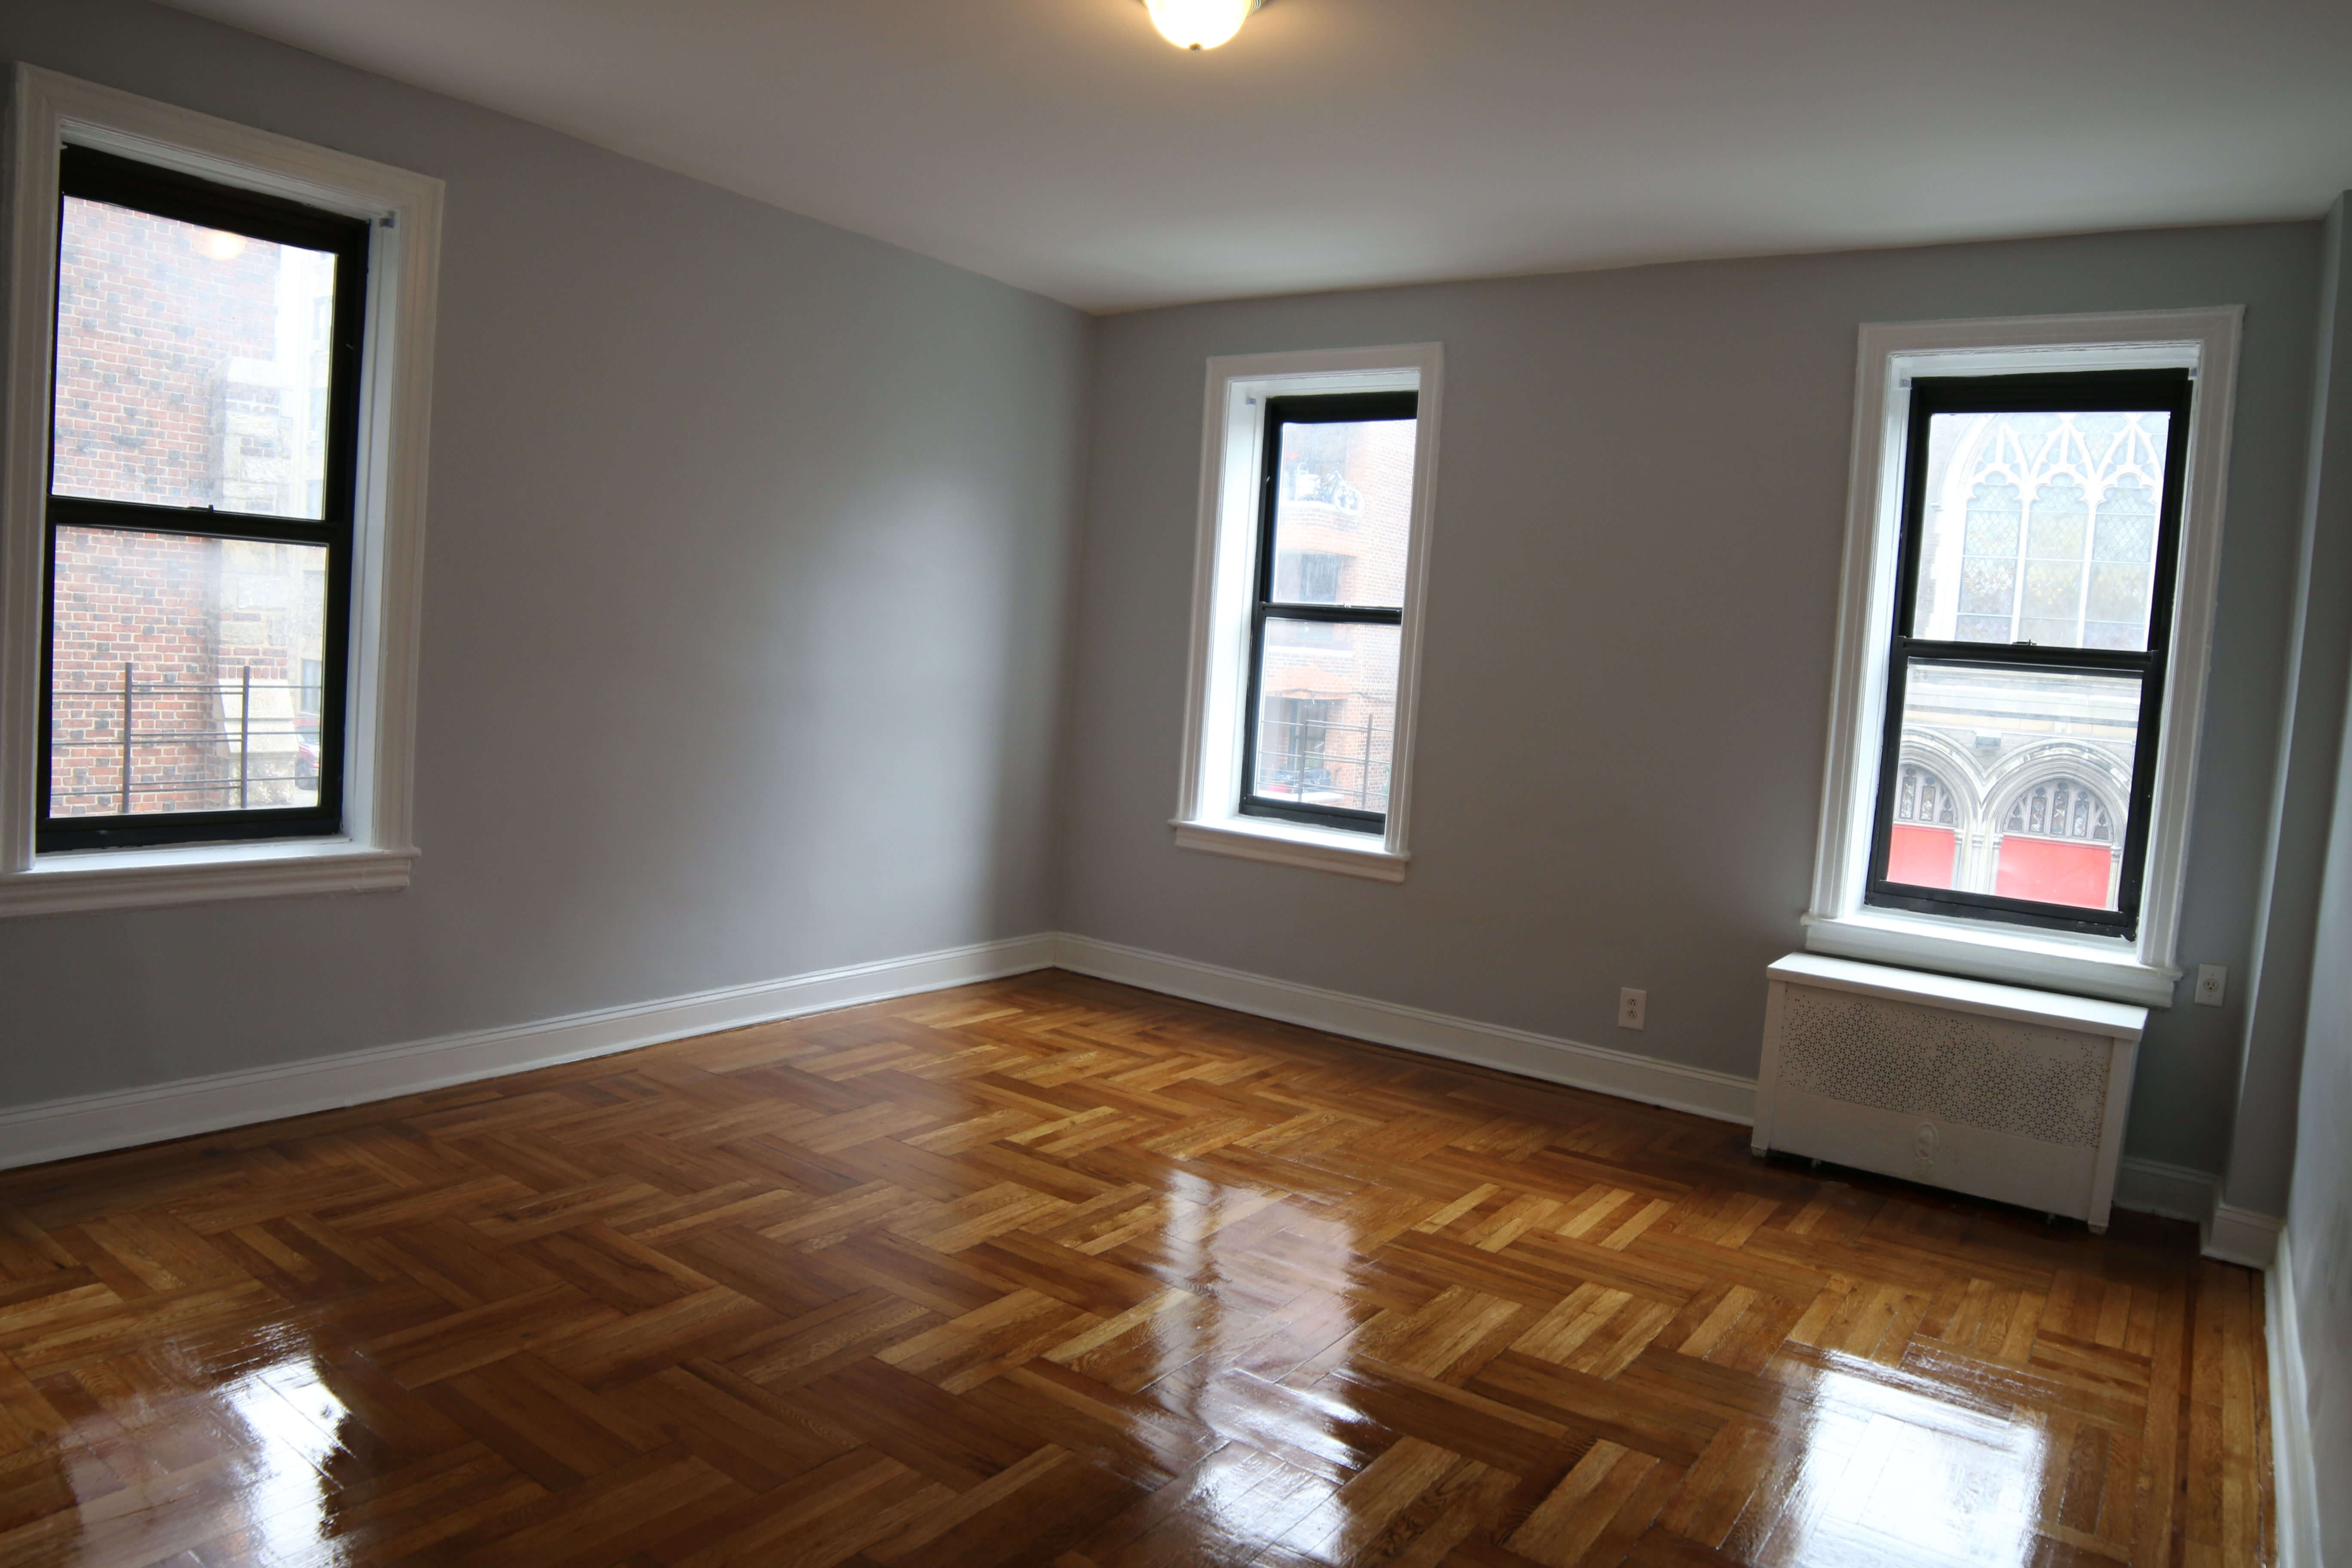 Brooklyn Apartments for Rent in Prospect Park South at 1 St. Paul's Court